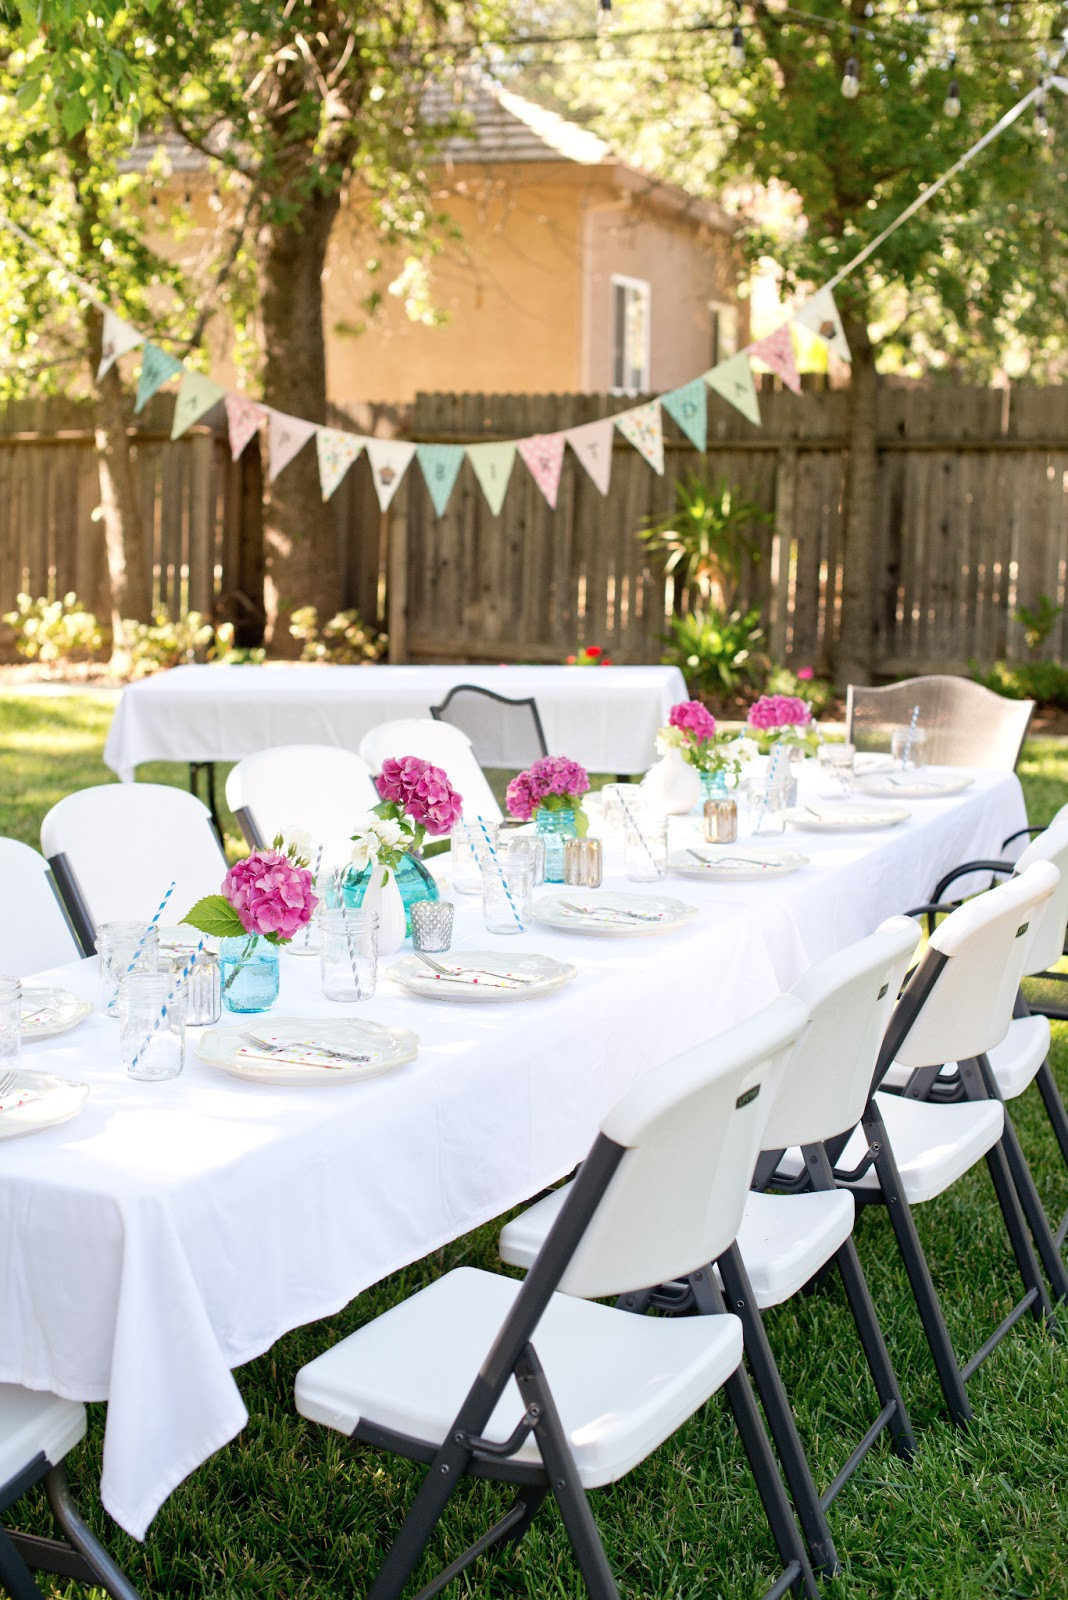 Ideas For Backyard Party
 Backyard Party Decorations For Unfor table Moments